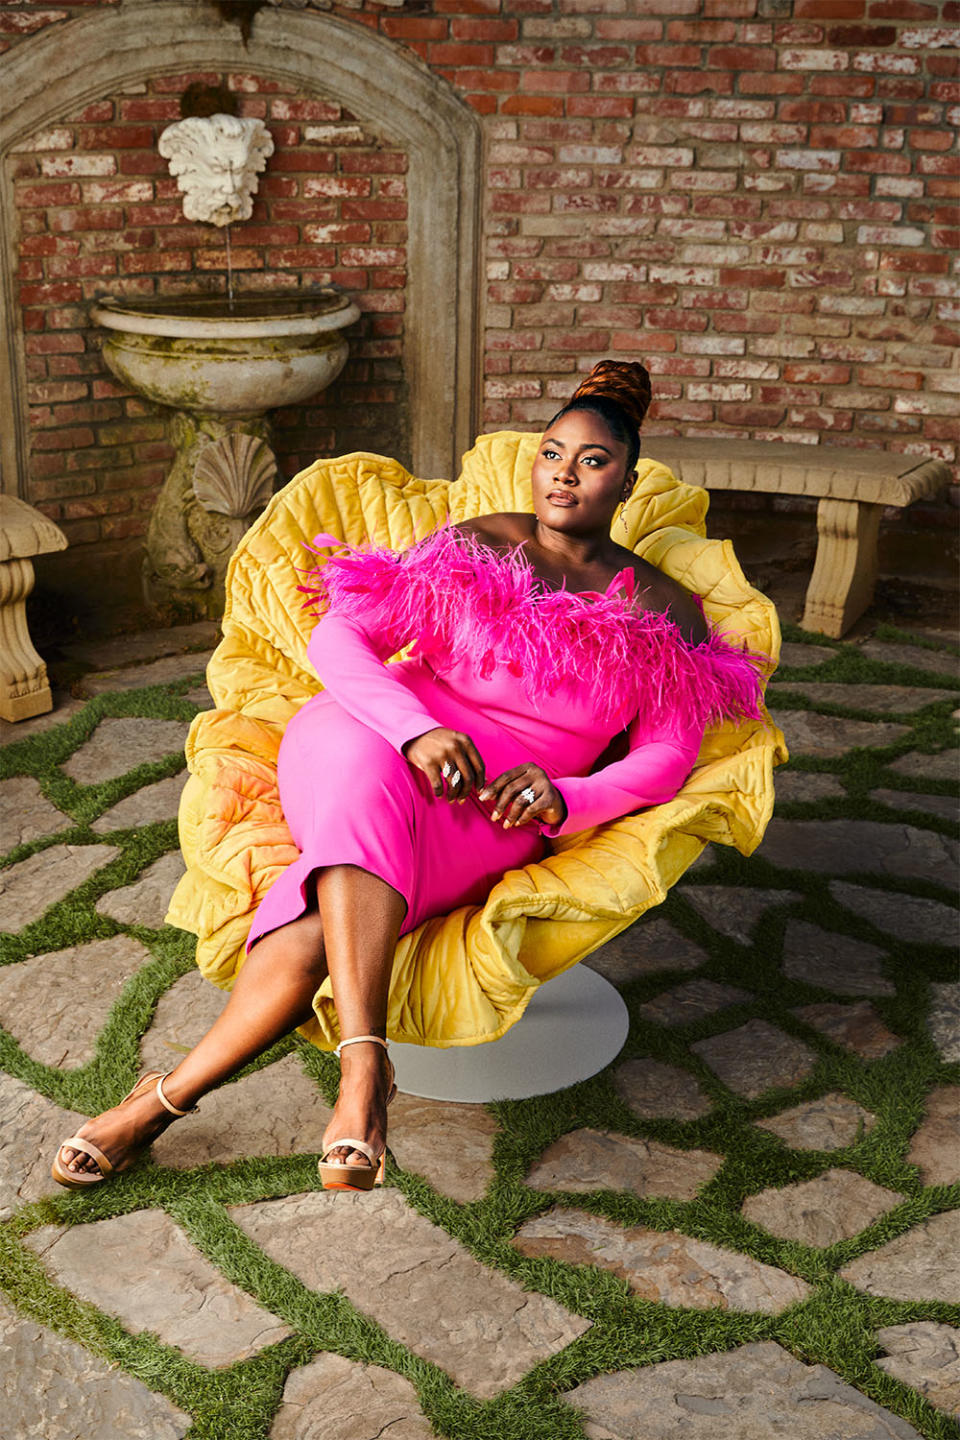 It has been real with each other, says Brooks about the bond among the castmembers. “We can have deep conversations about the hurt and pain we’ve been through in this industry.” Danielle Brooks was styled by Jennifer Austin.